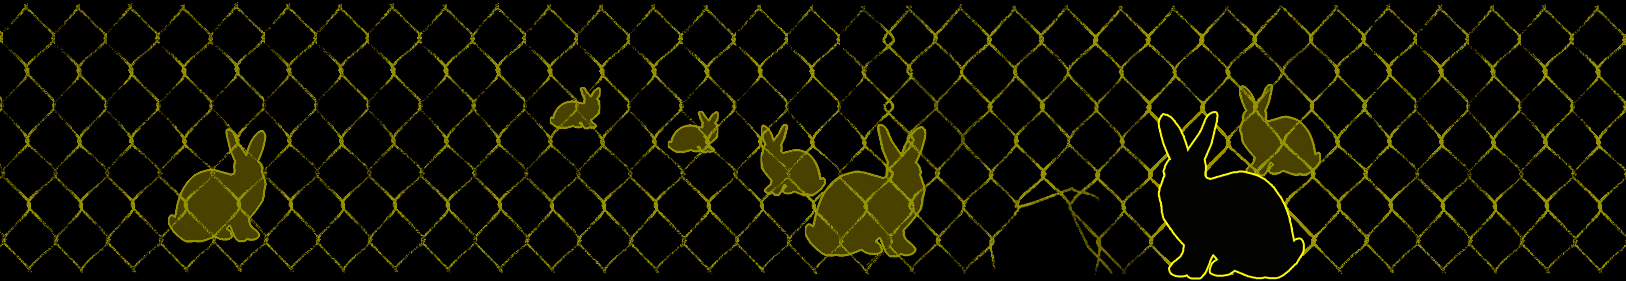 rabbitprooffence_by_08.gif